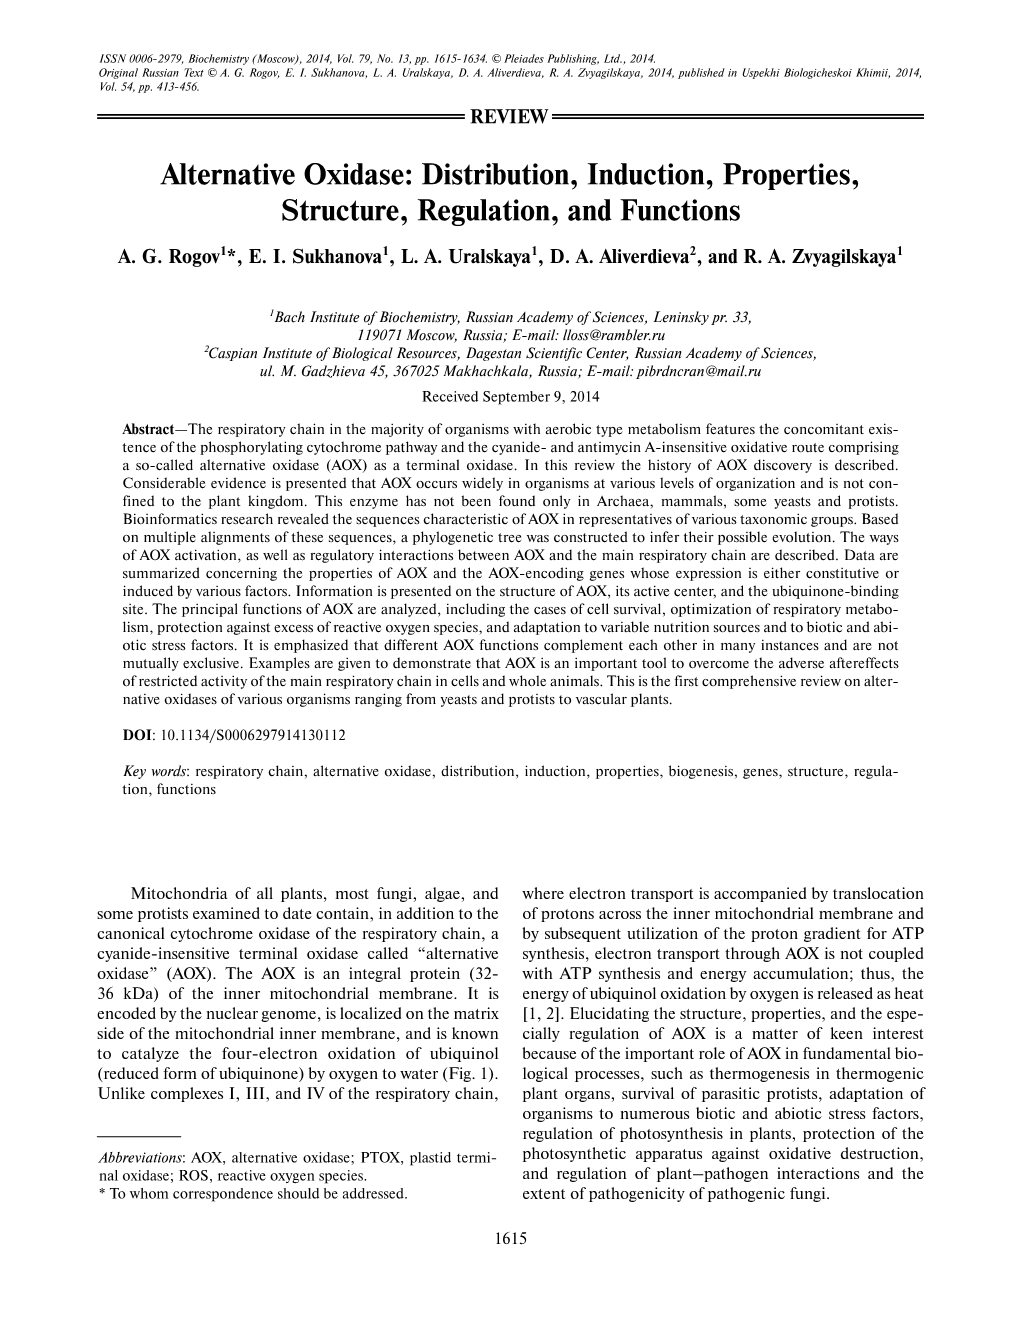 Alternative Oxidase: Distribution, Induction, Properties, Structure, Regulation, and Functions